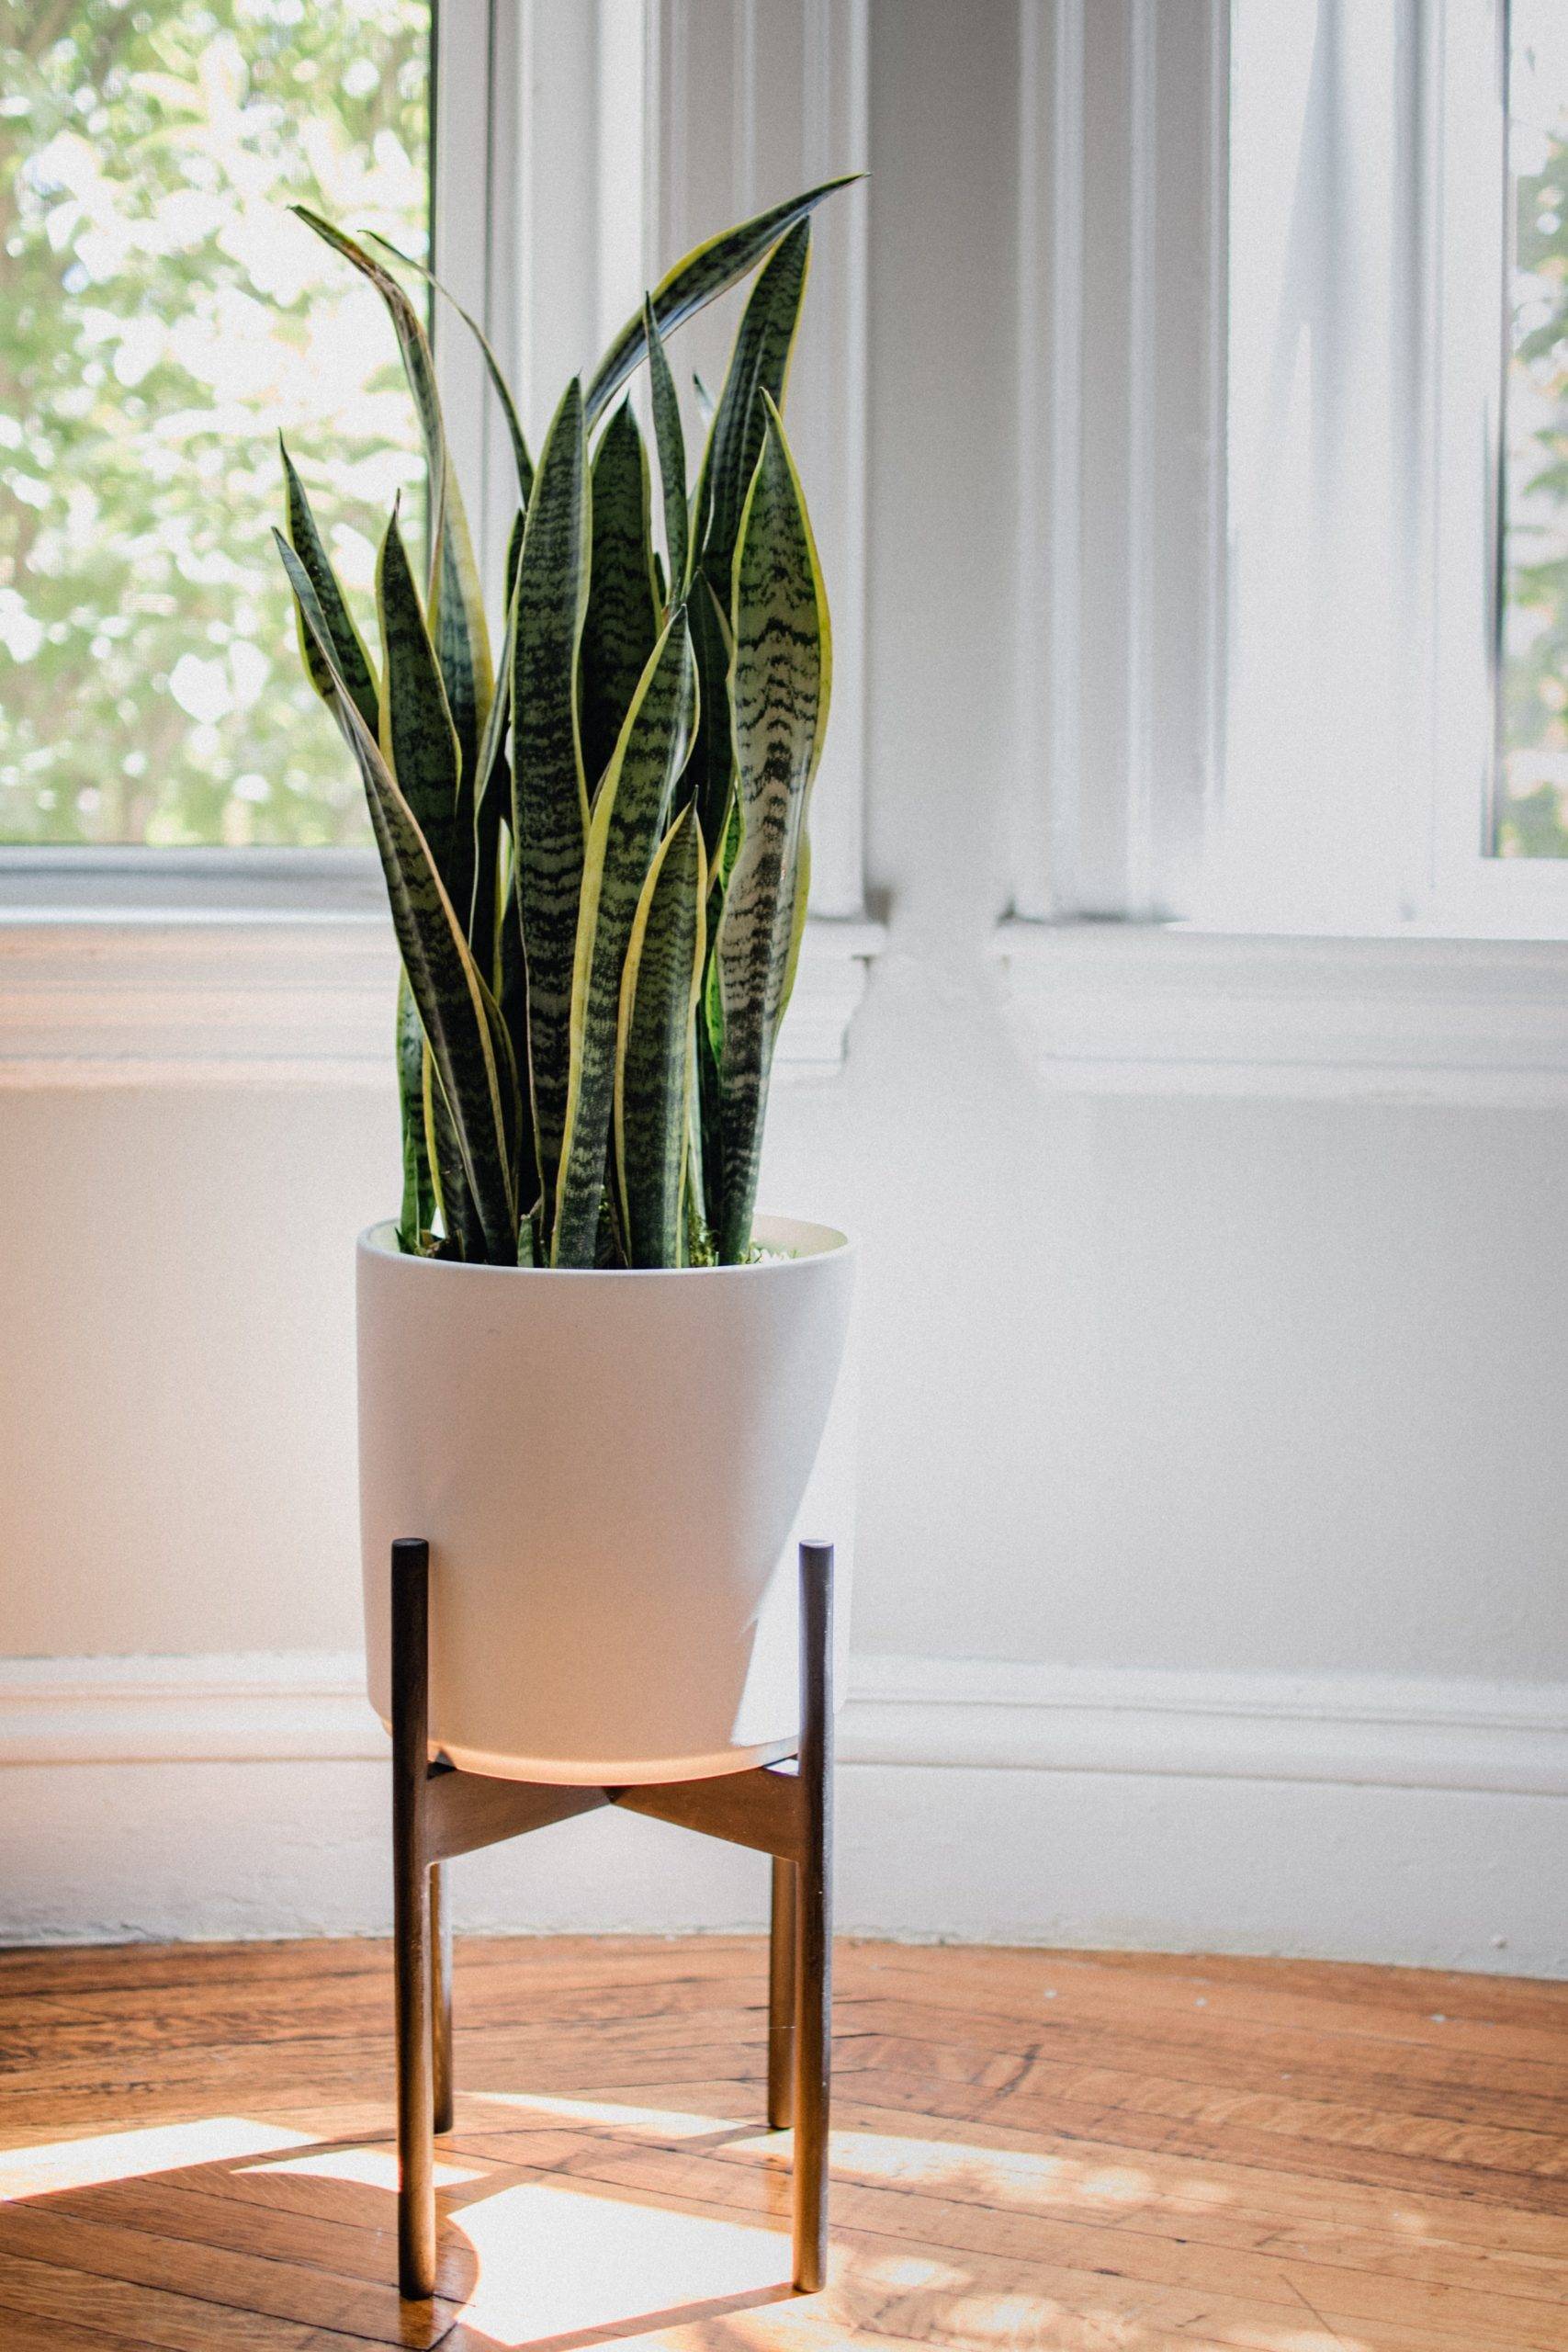 Snake plant doesn't require extra effort (from Unsplash)